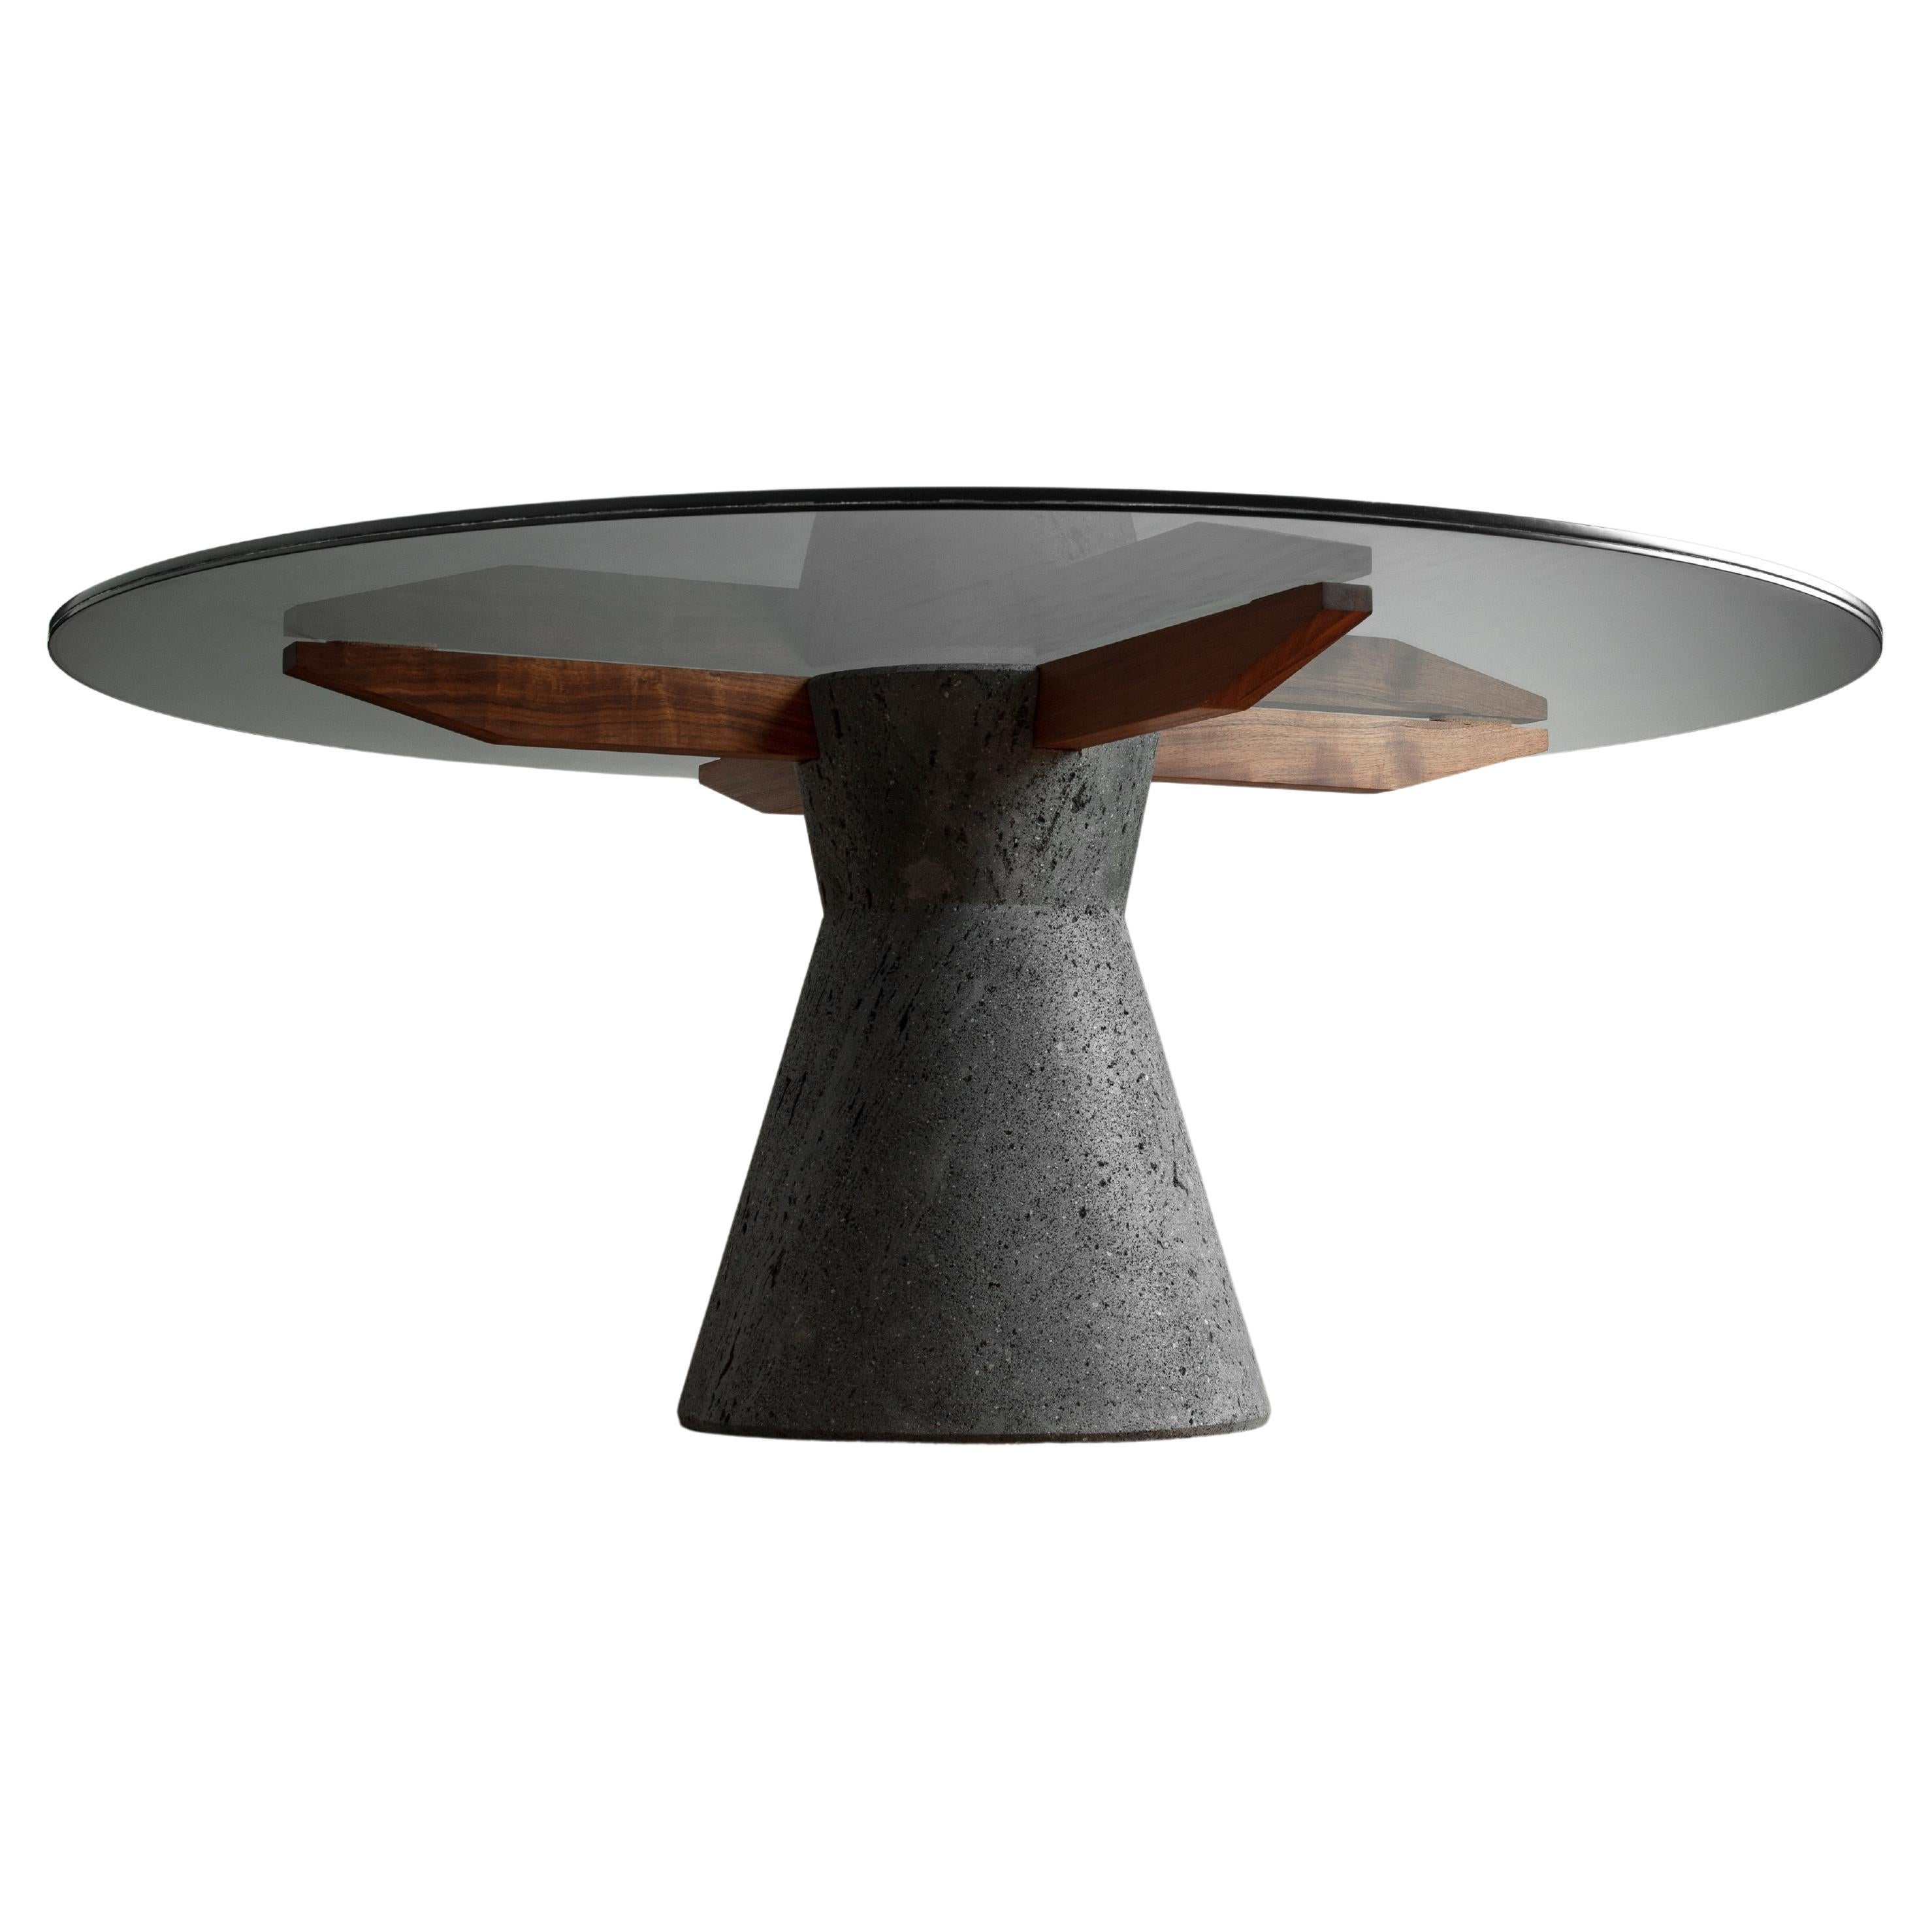 Stricta, Sculptural Dining Table Made of Lava Stone and Glass Top by CMX